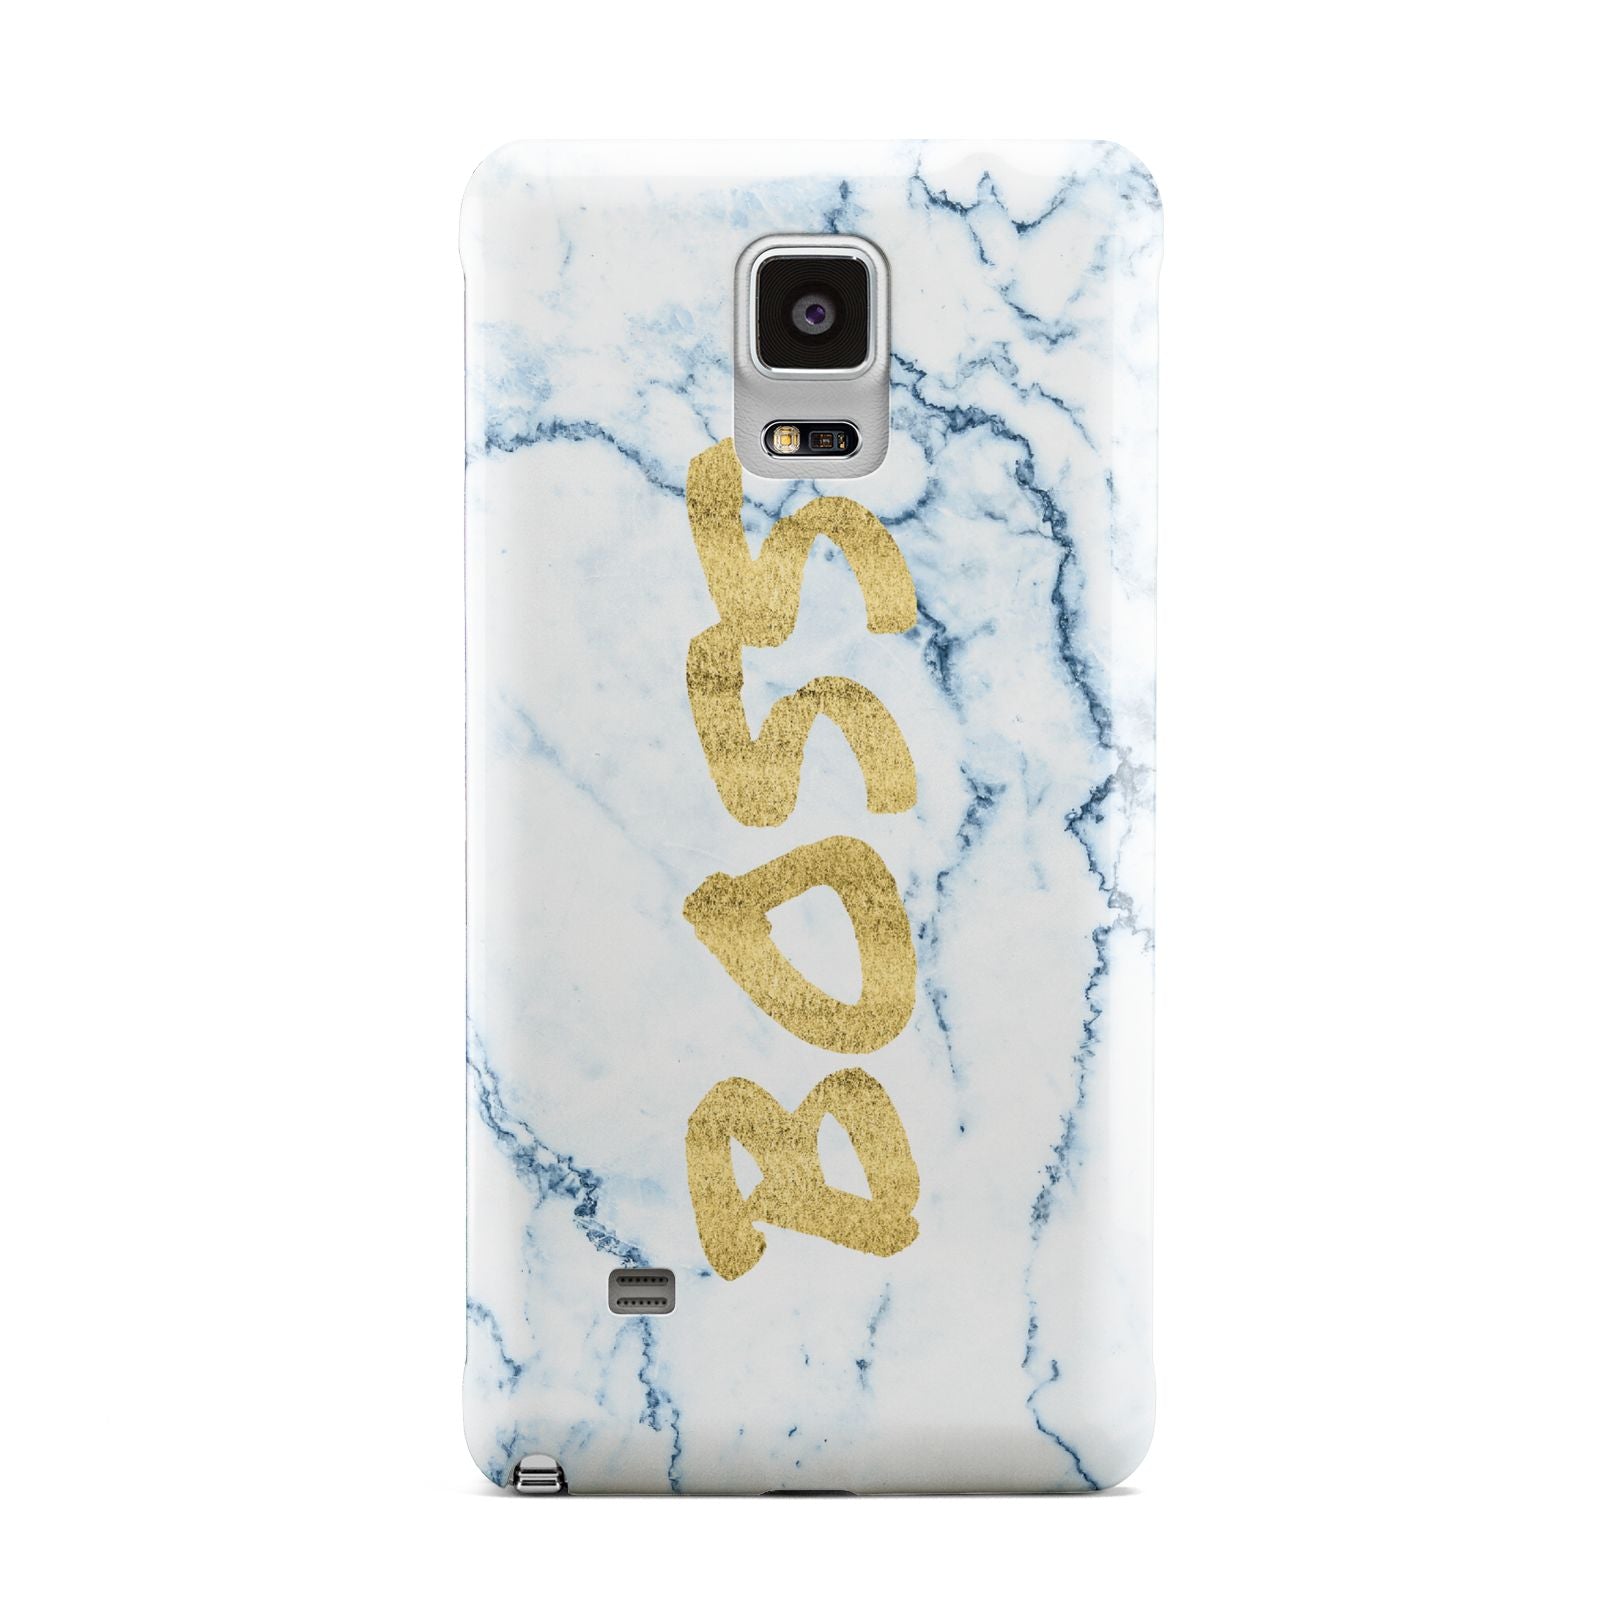 Boss Gold Blue Marble Effect Samsung Galaxy Note 4 Case